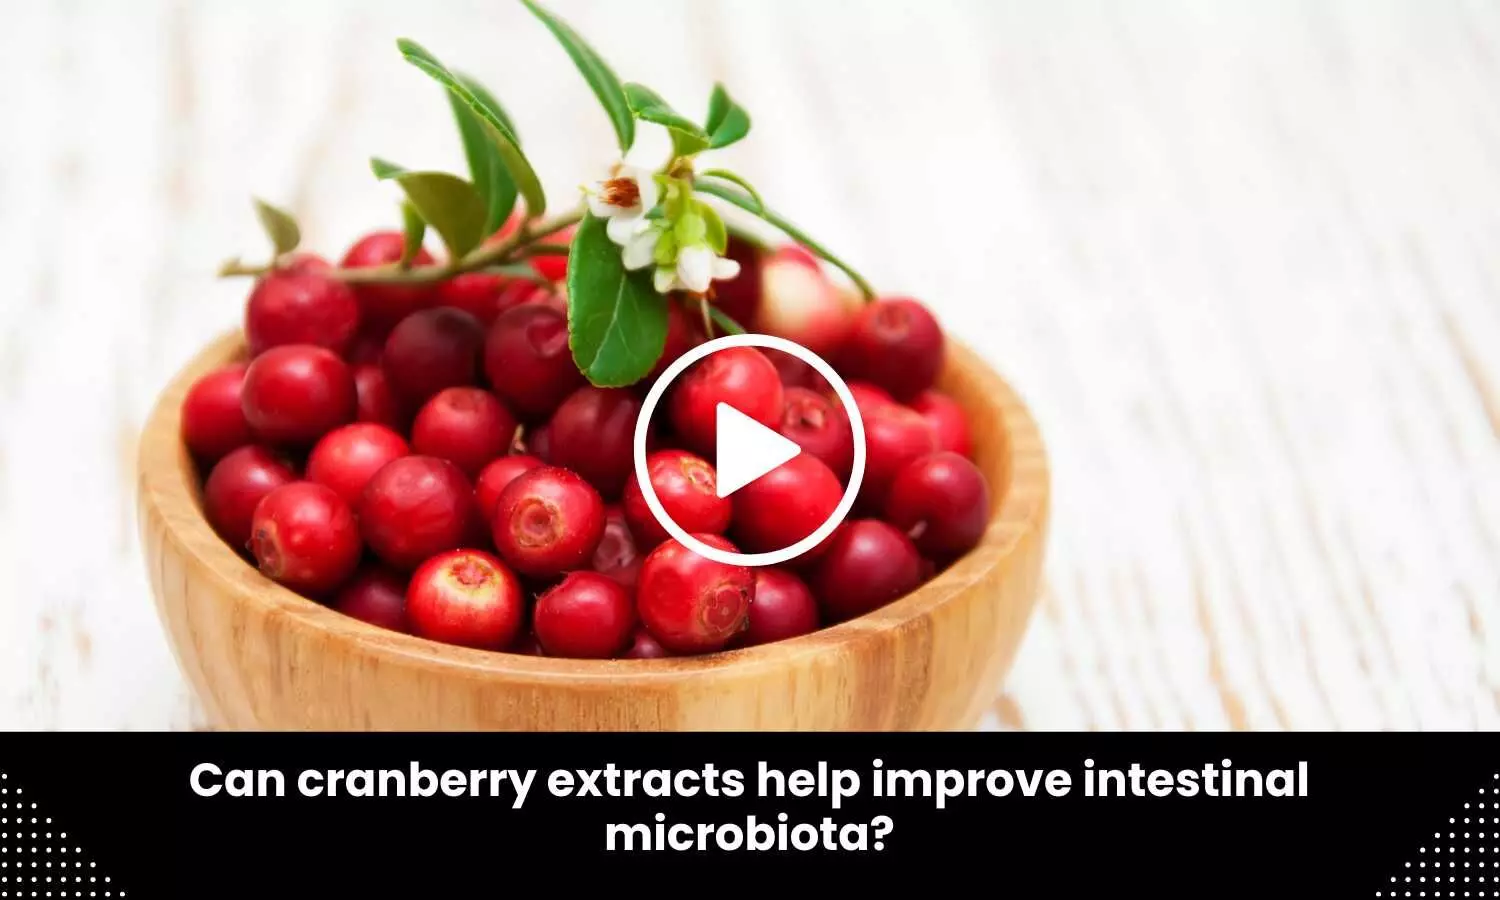 Can cranberry extracts help improve intestinal microbiota?